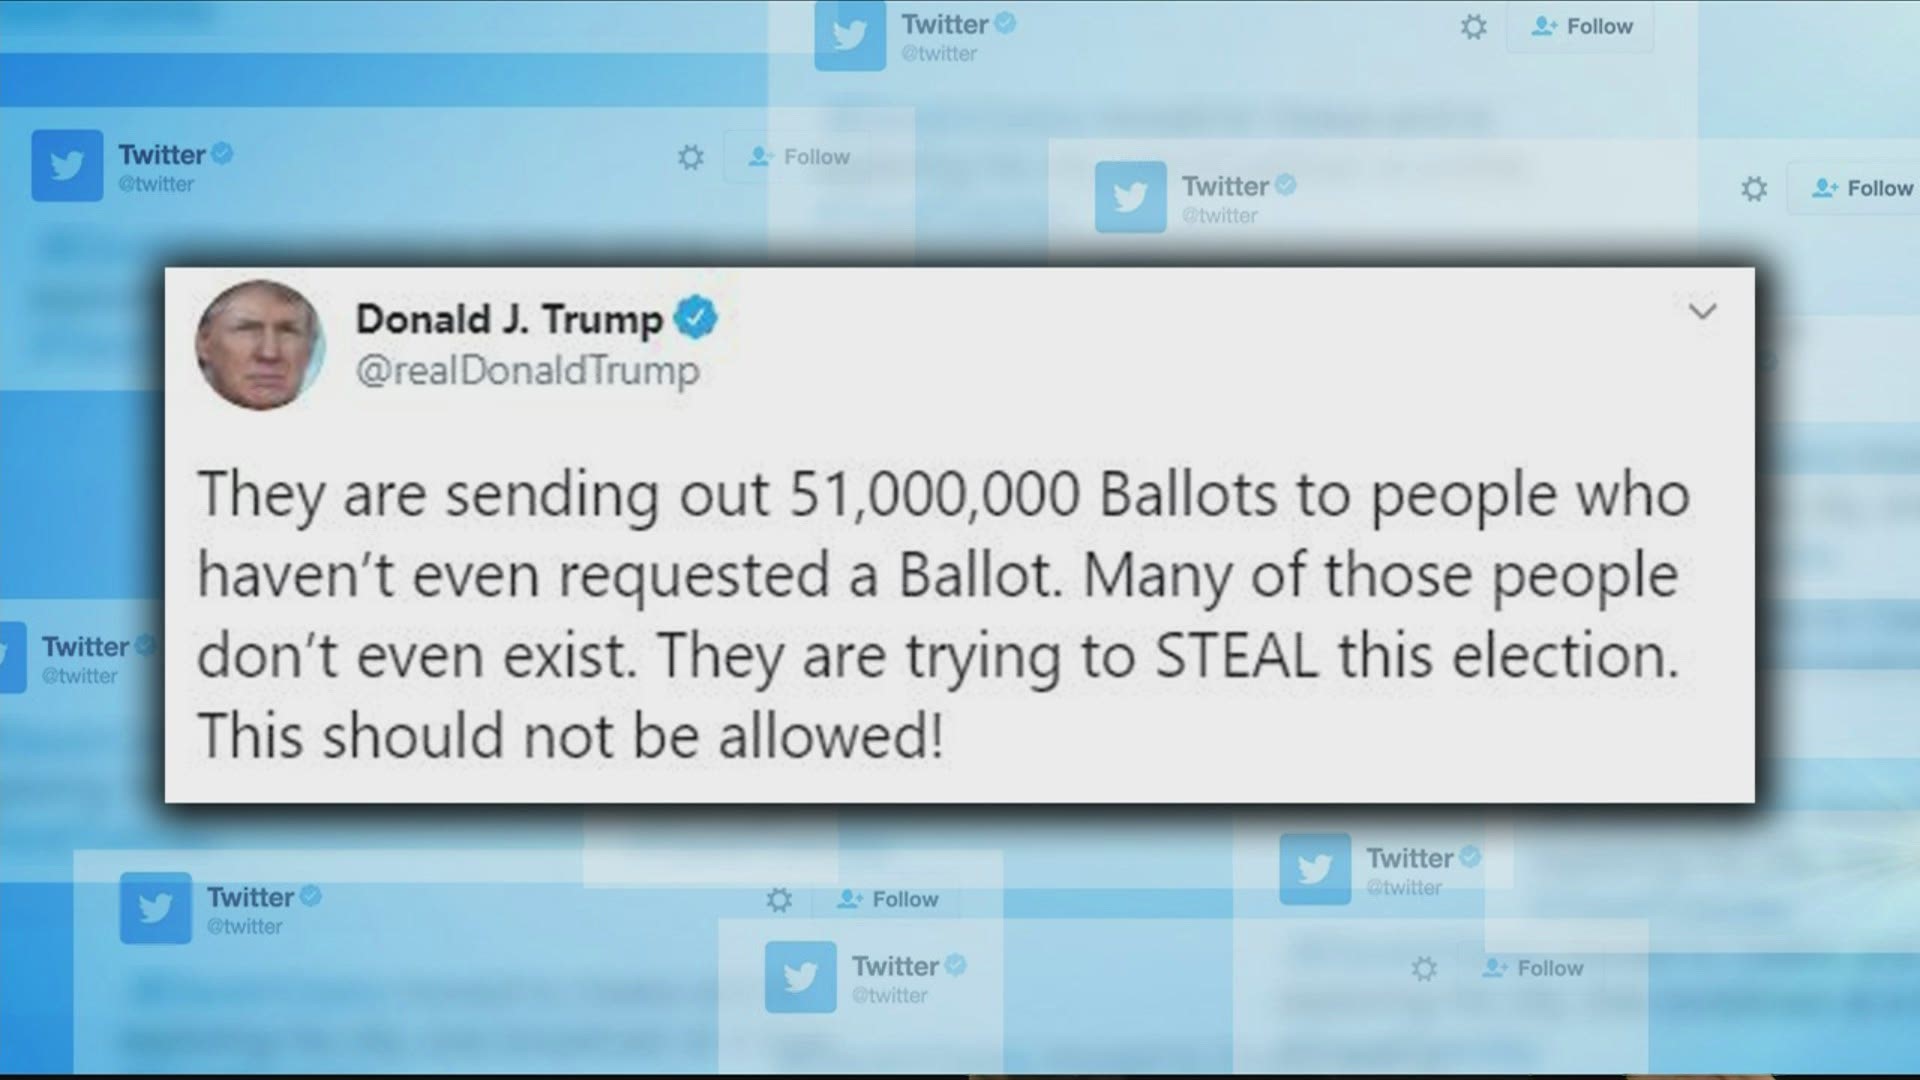 Local 5 reached out to the Polk County Auditor on President Trump's claim about ballots being sent to people who haven't requested them.